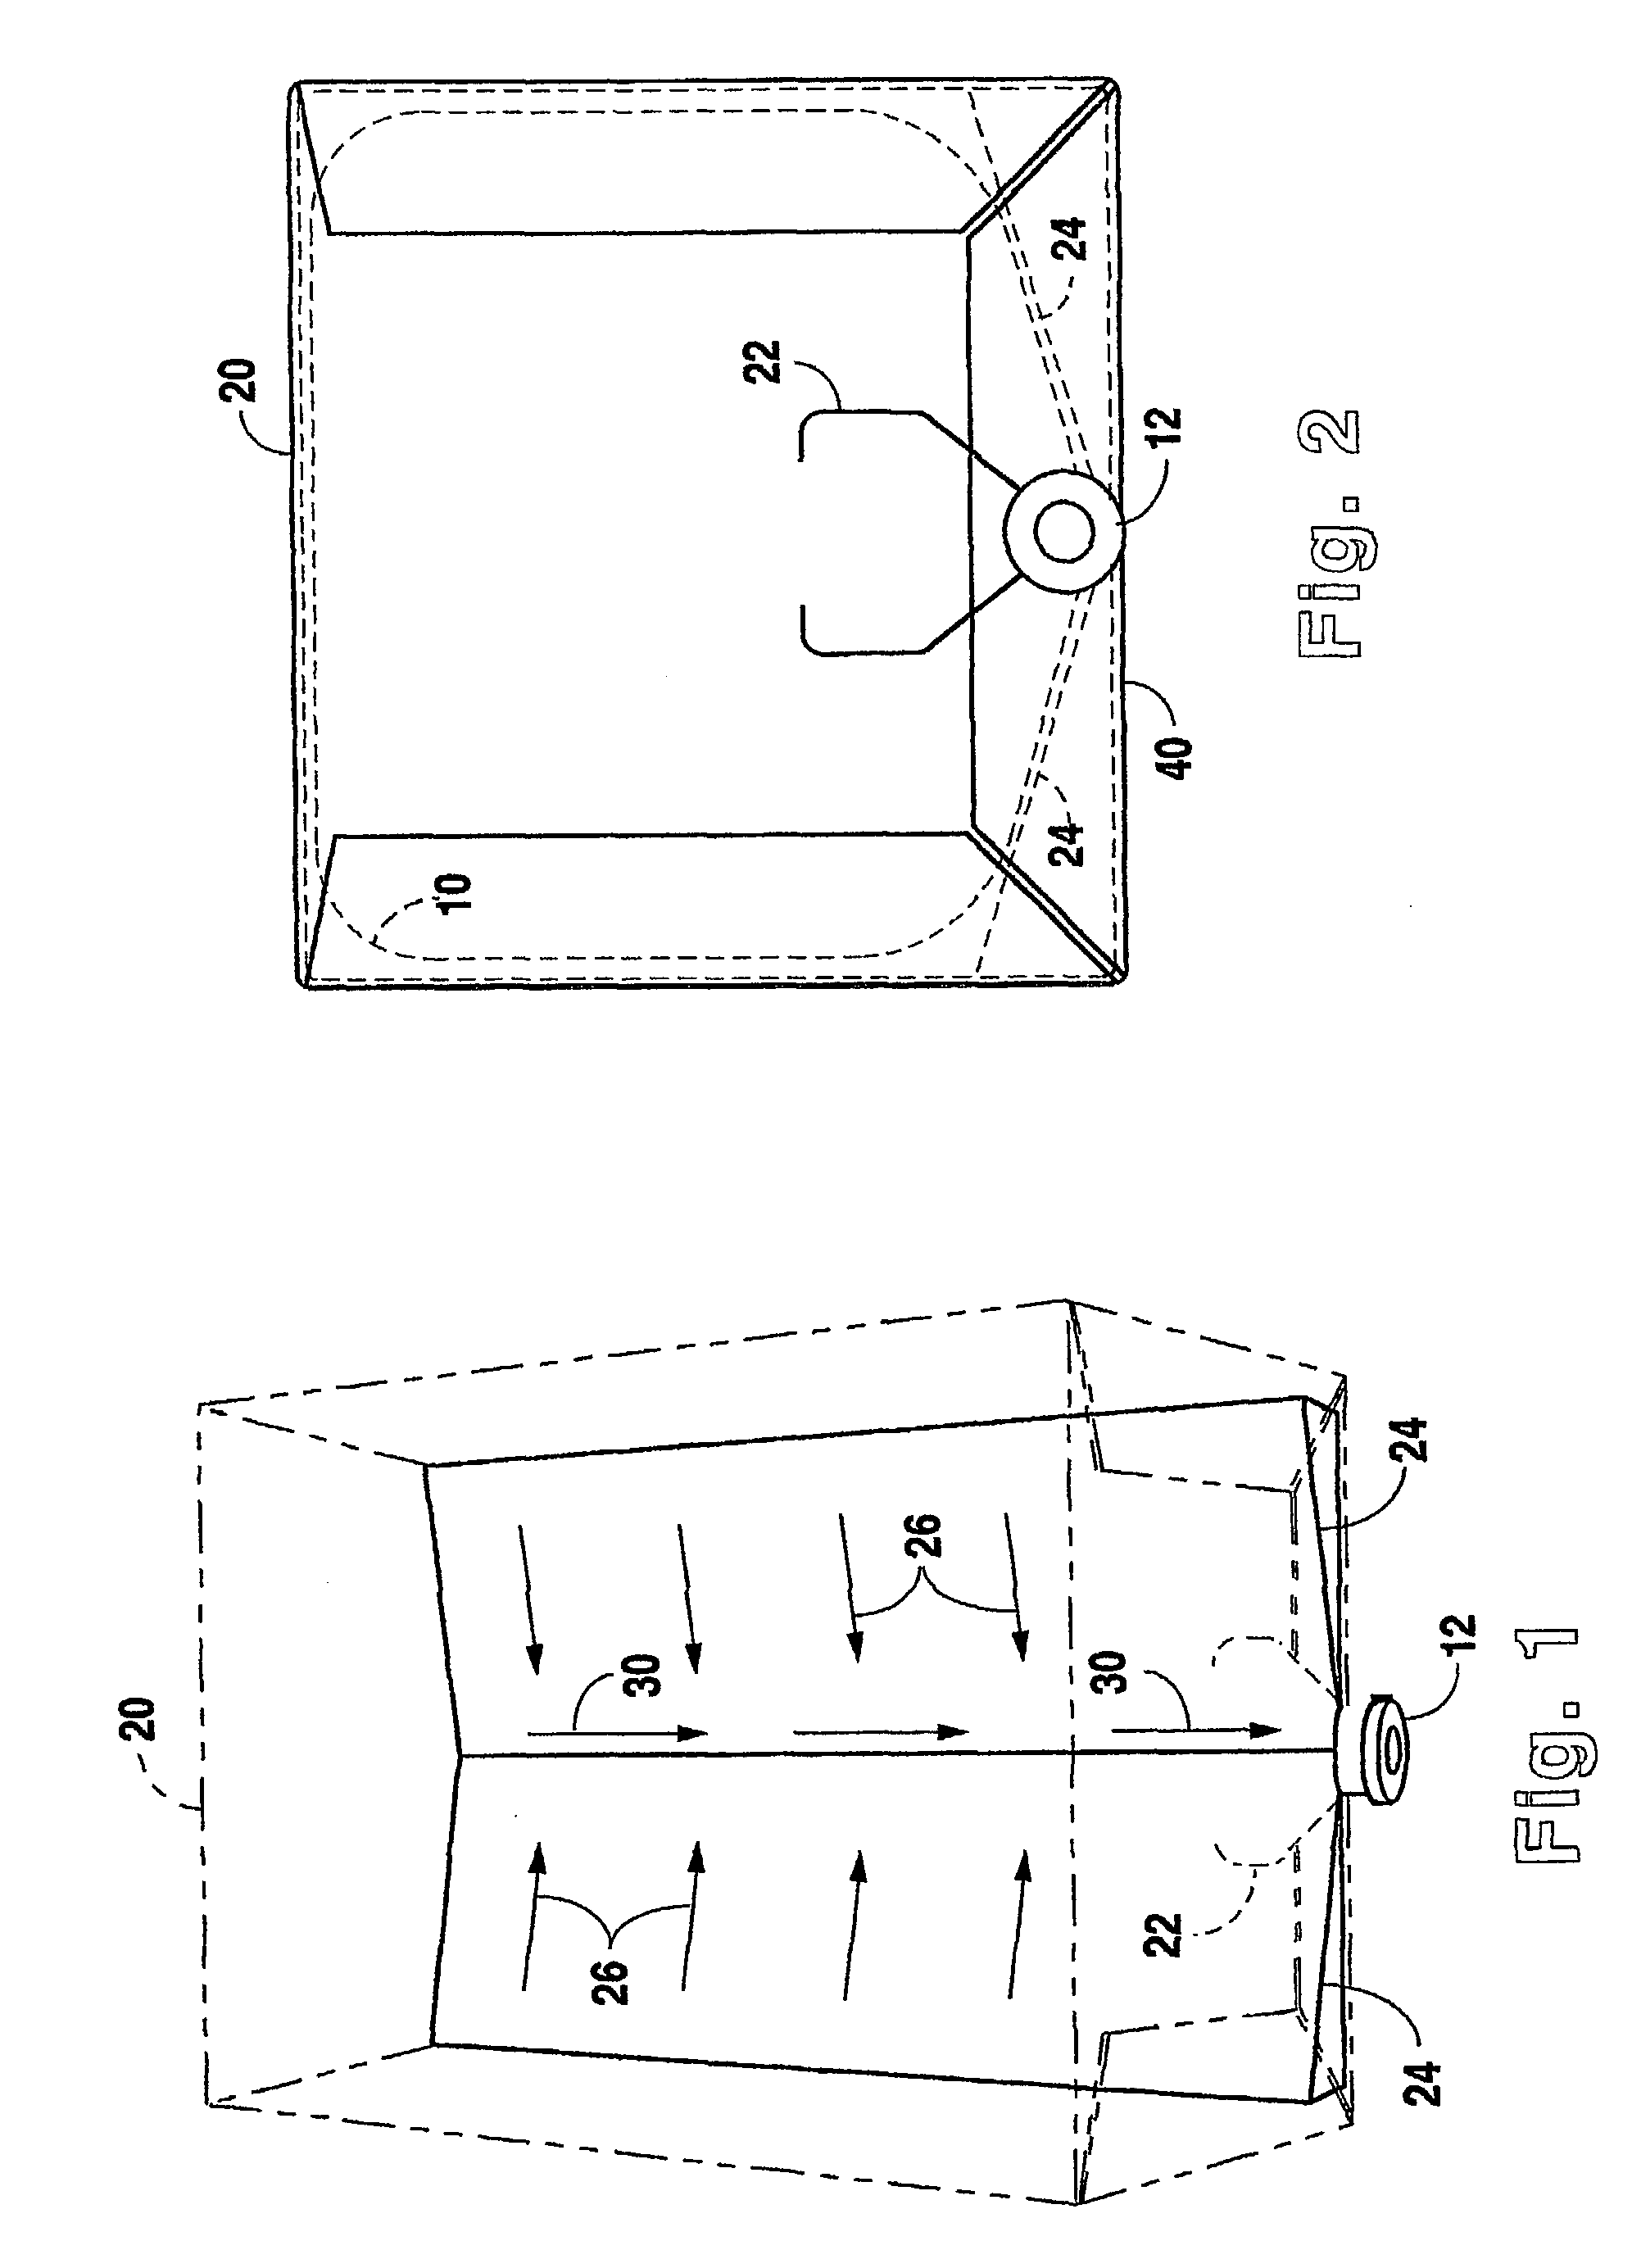 Bag-in-box container for liquids